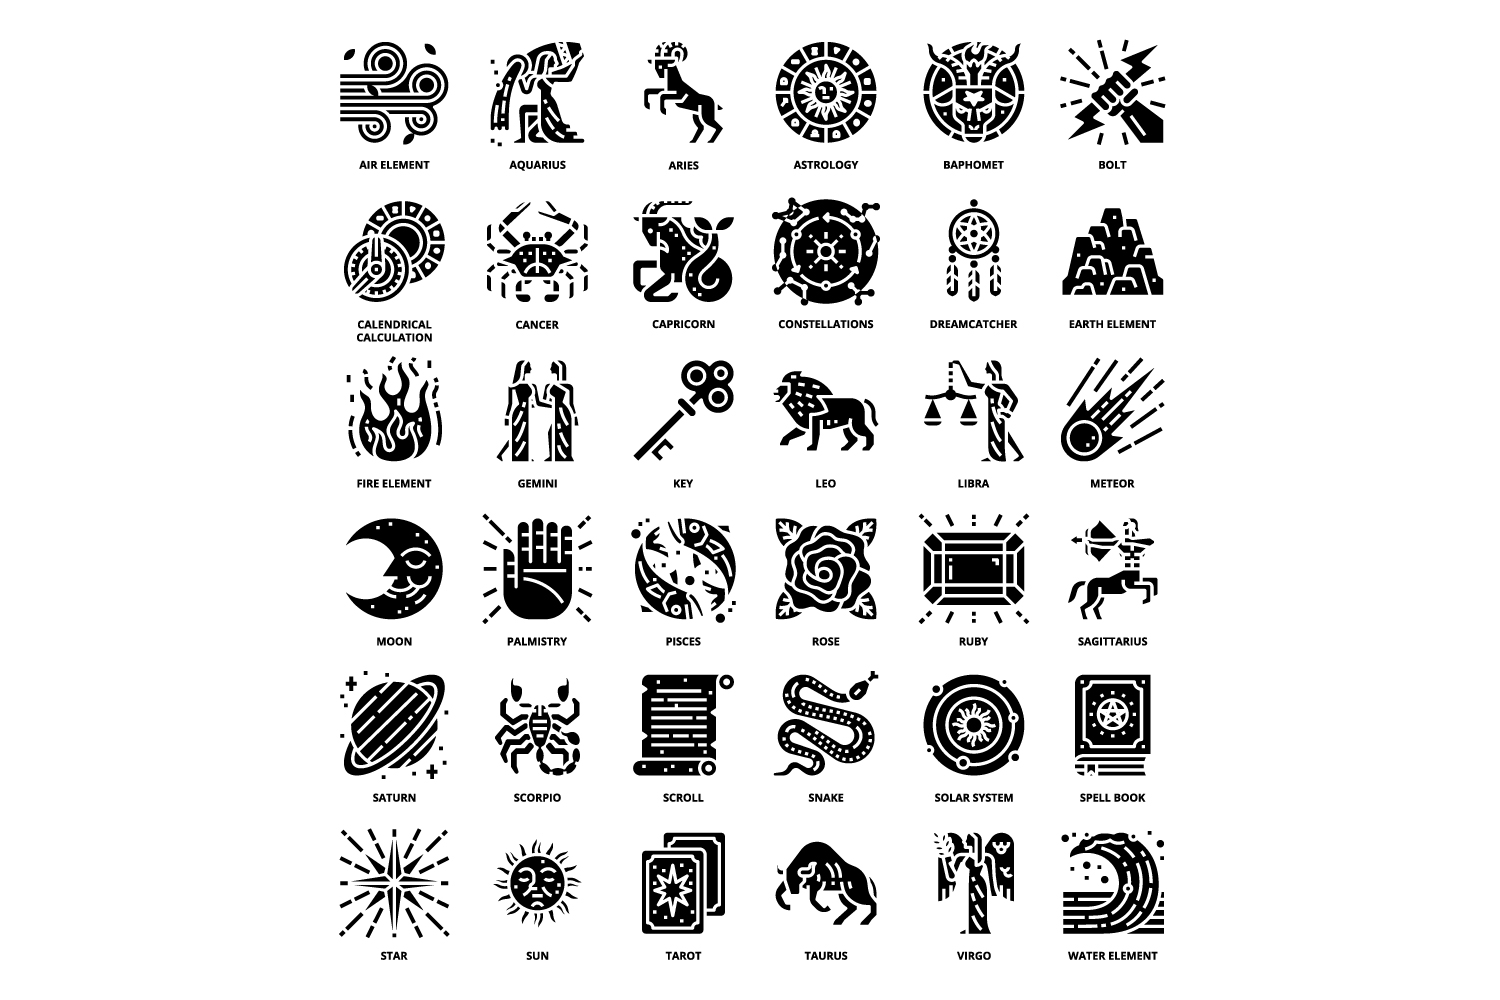 Black and white image of ancient symbols.